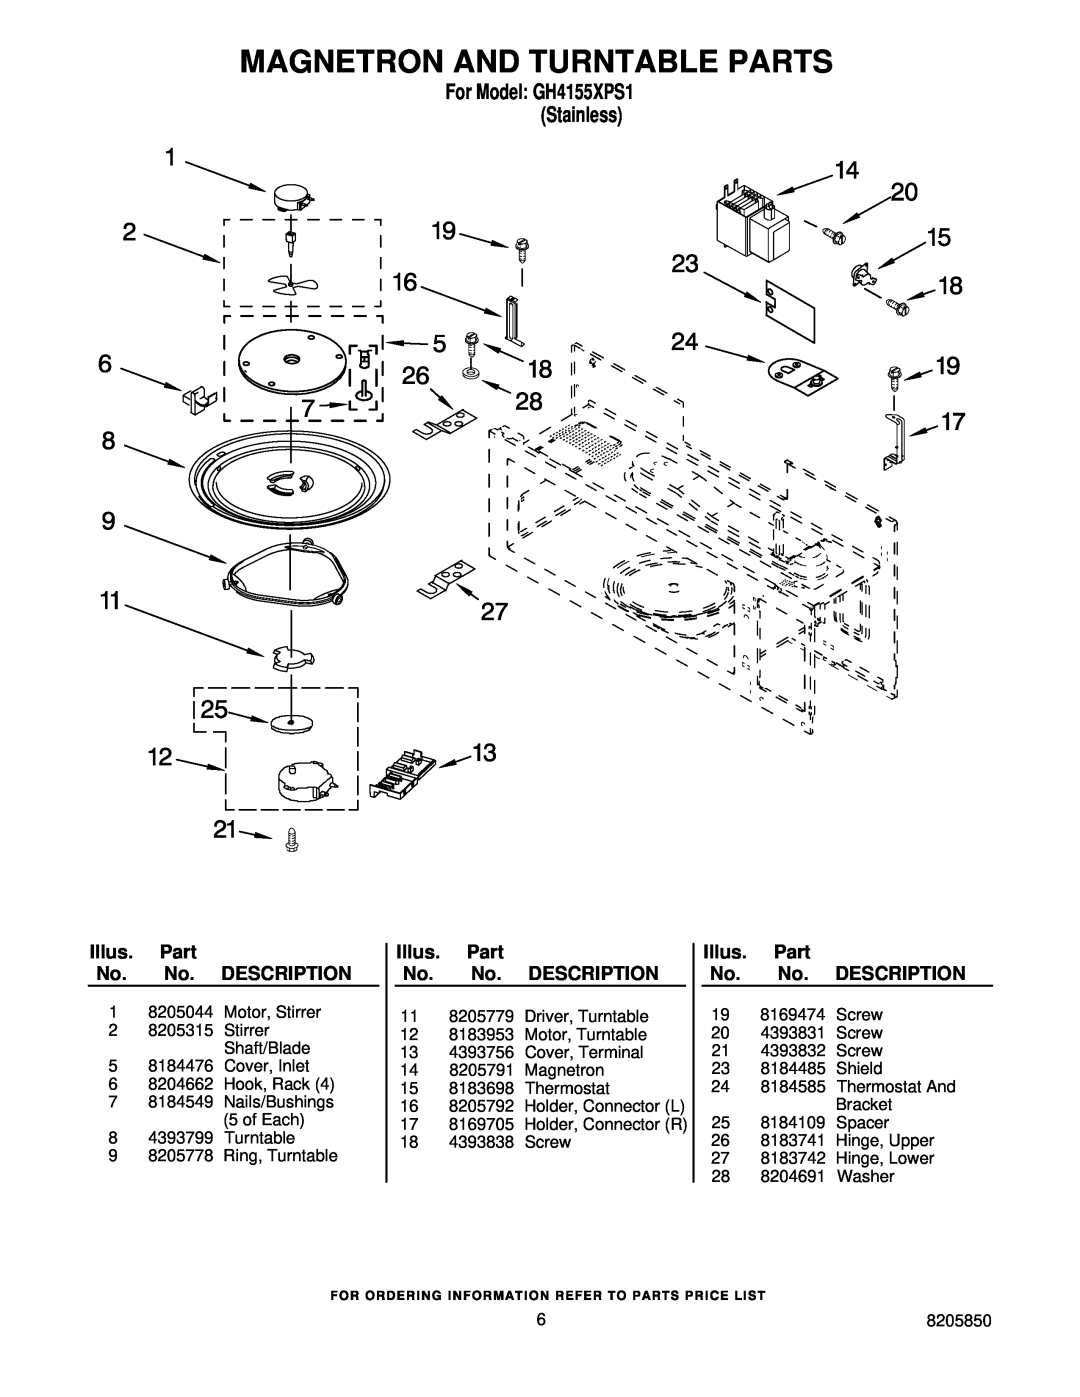 Whirlpool GH4155XPS1 installation instructions Magnetron And Turntable Parts, Illus. Part No. No. DESCRIPTION 